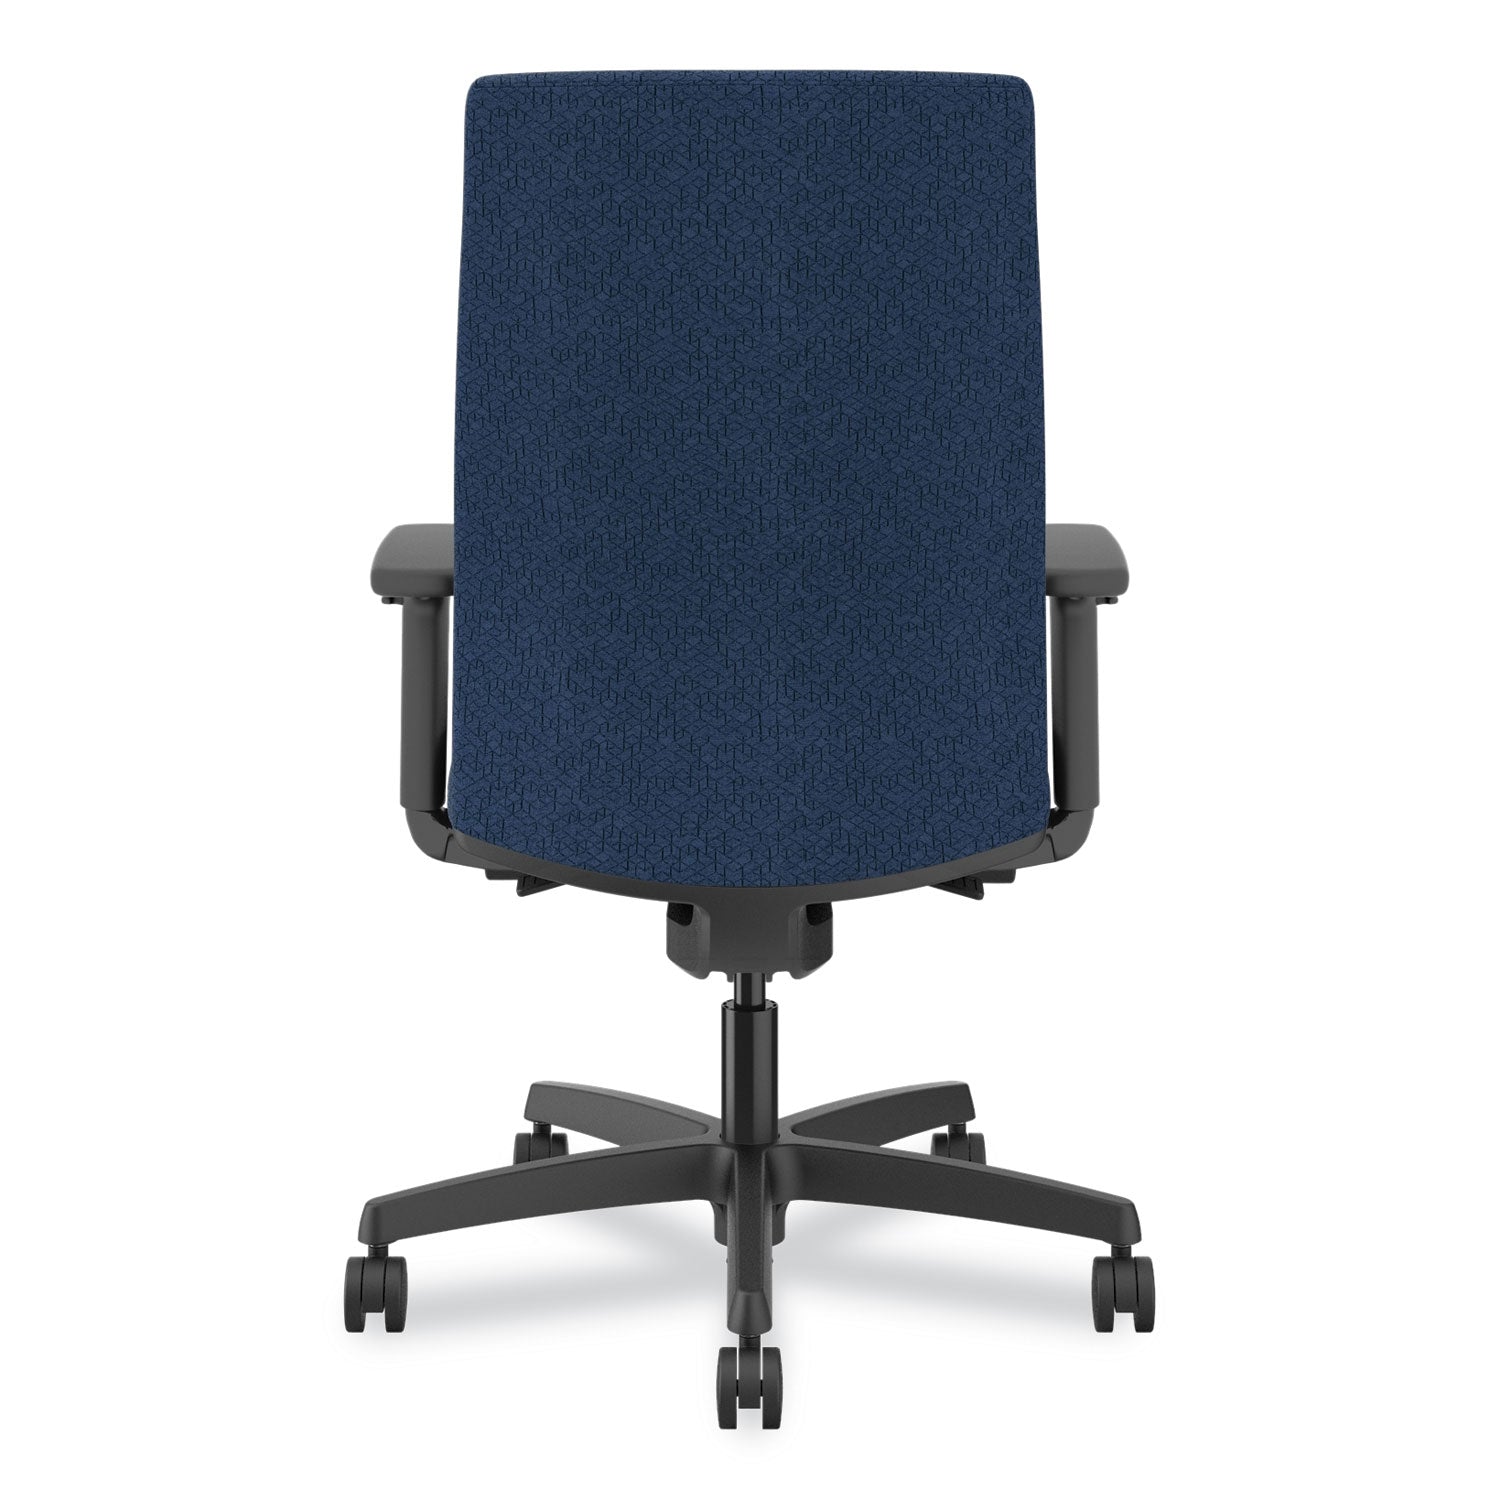 ignition-20-upholstered-mid-back-task-chair-17-to-215-seat-height-navy-fabric-seat-back-ships-in-7-10-business-days_honi2u2ahax13tk - 2